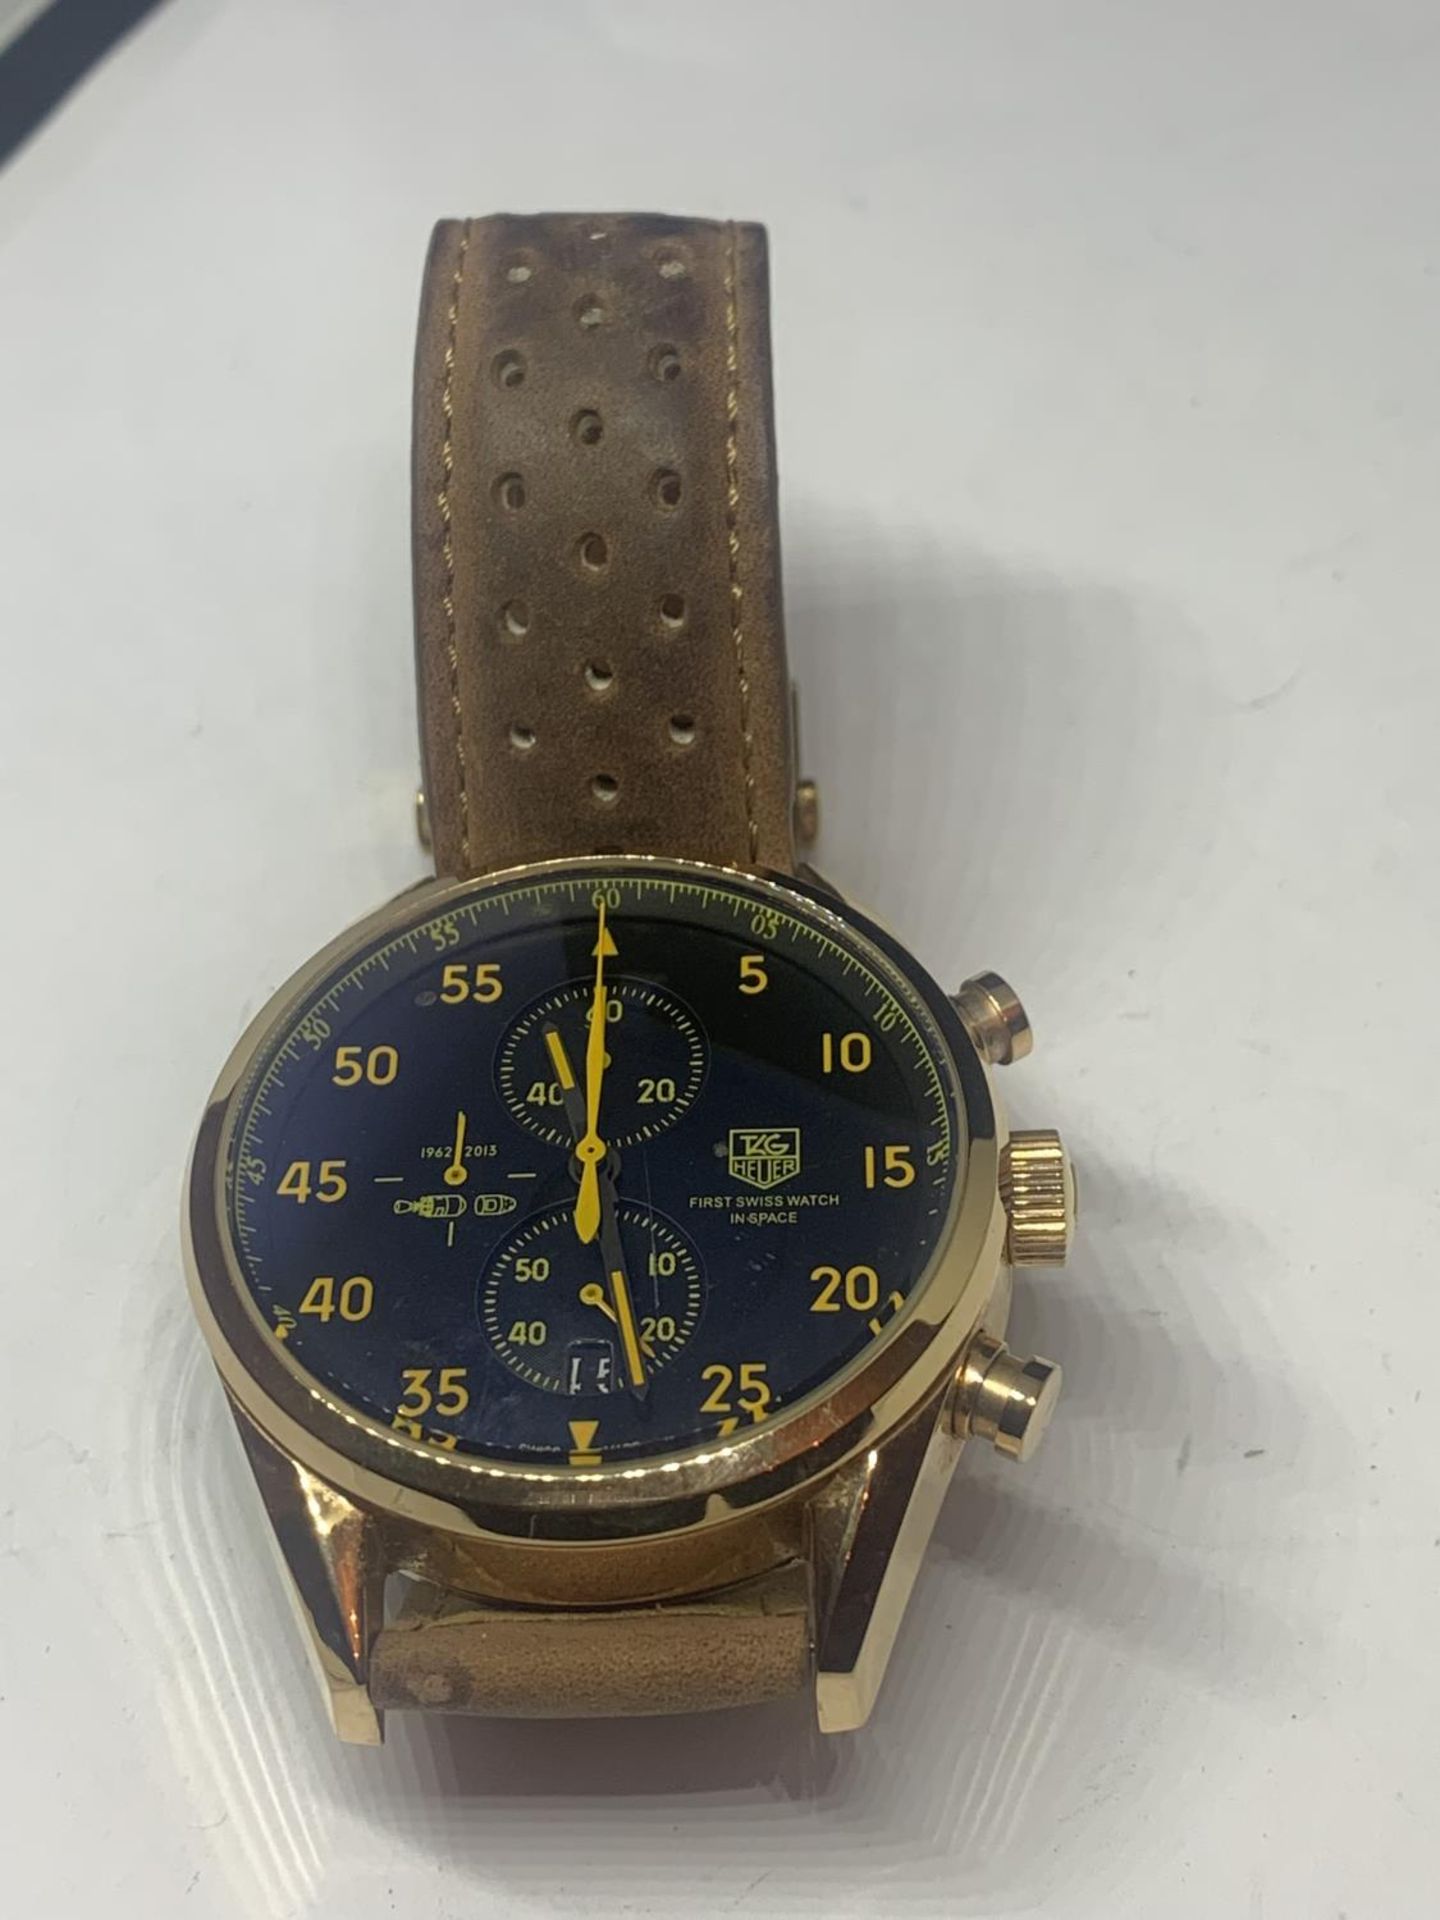 A GENTS FASHION WATCH WITH A BROWN LEATHER STRAP SEEN WORKING BUT NO WARRANTY